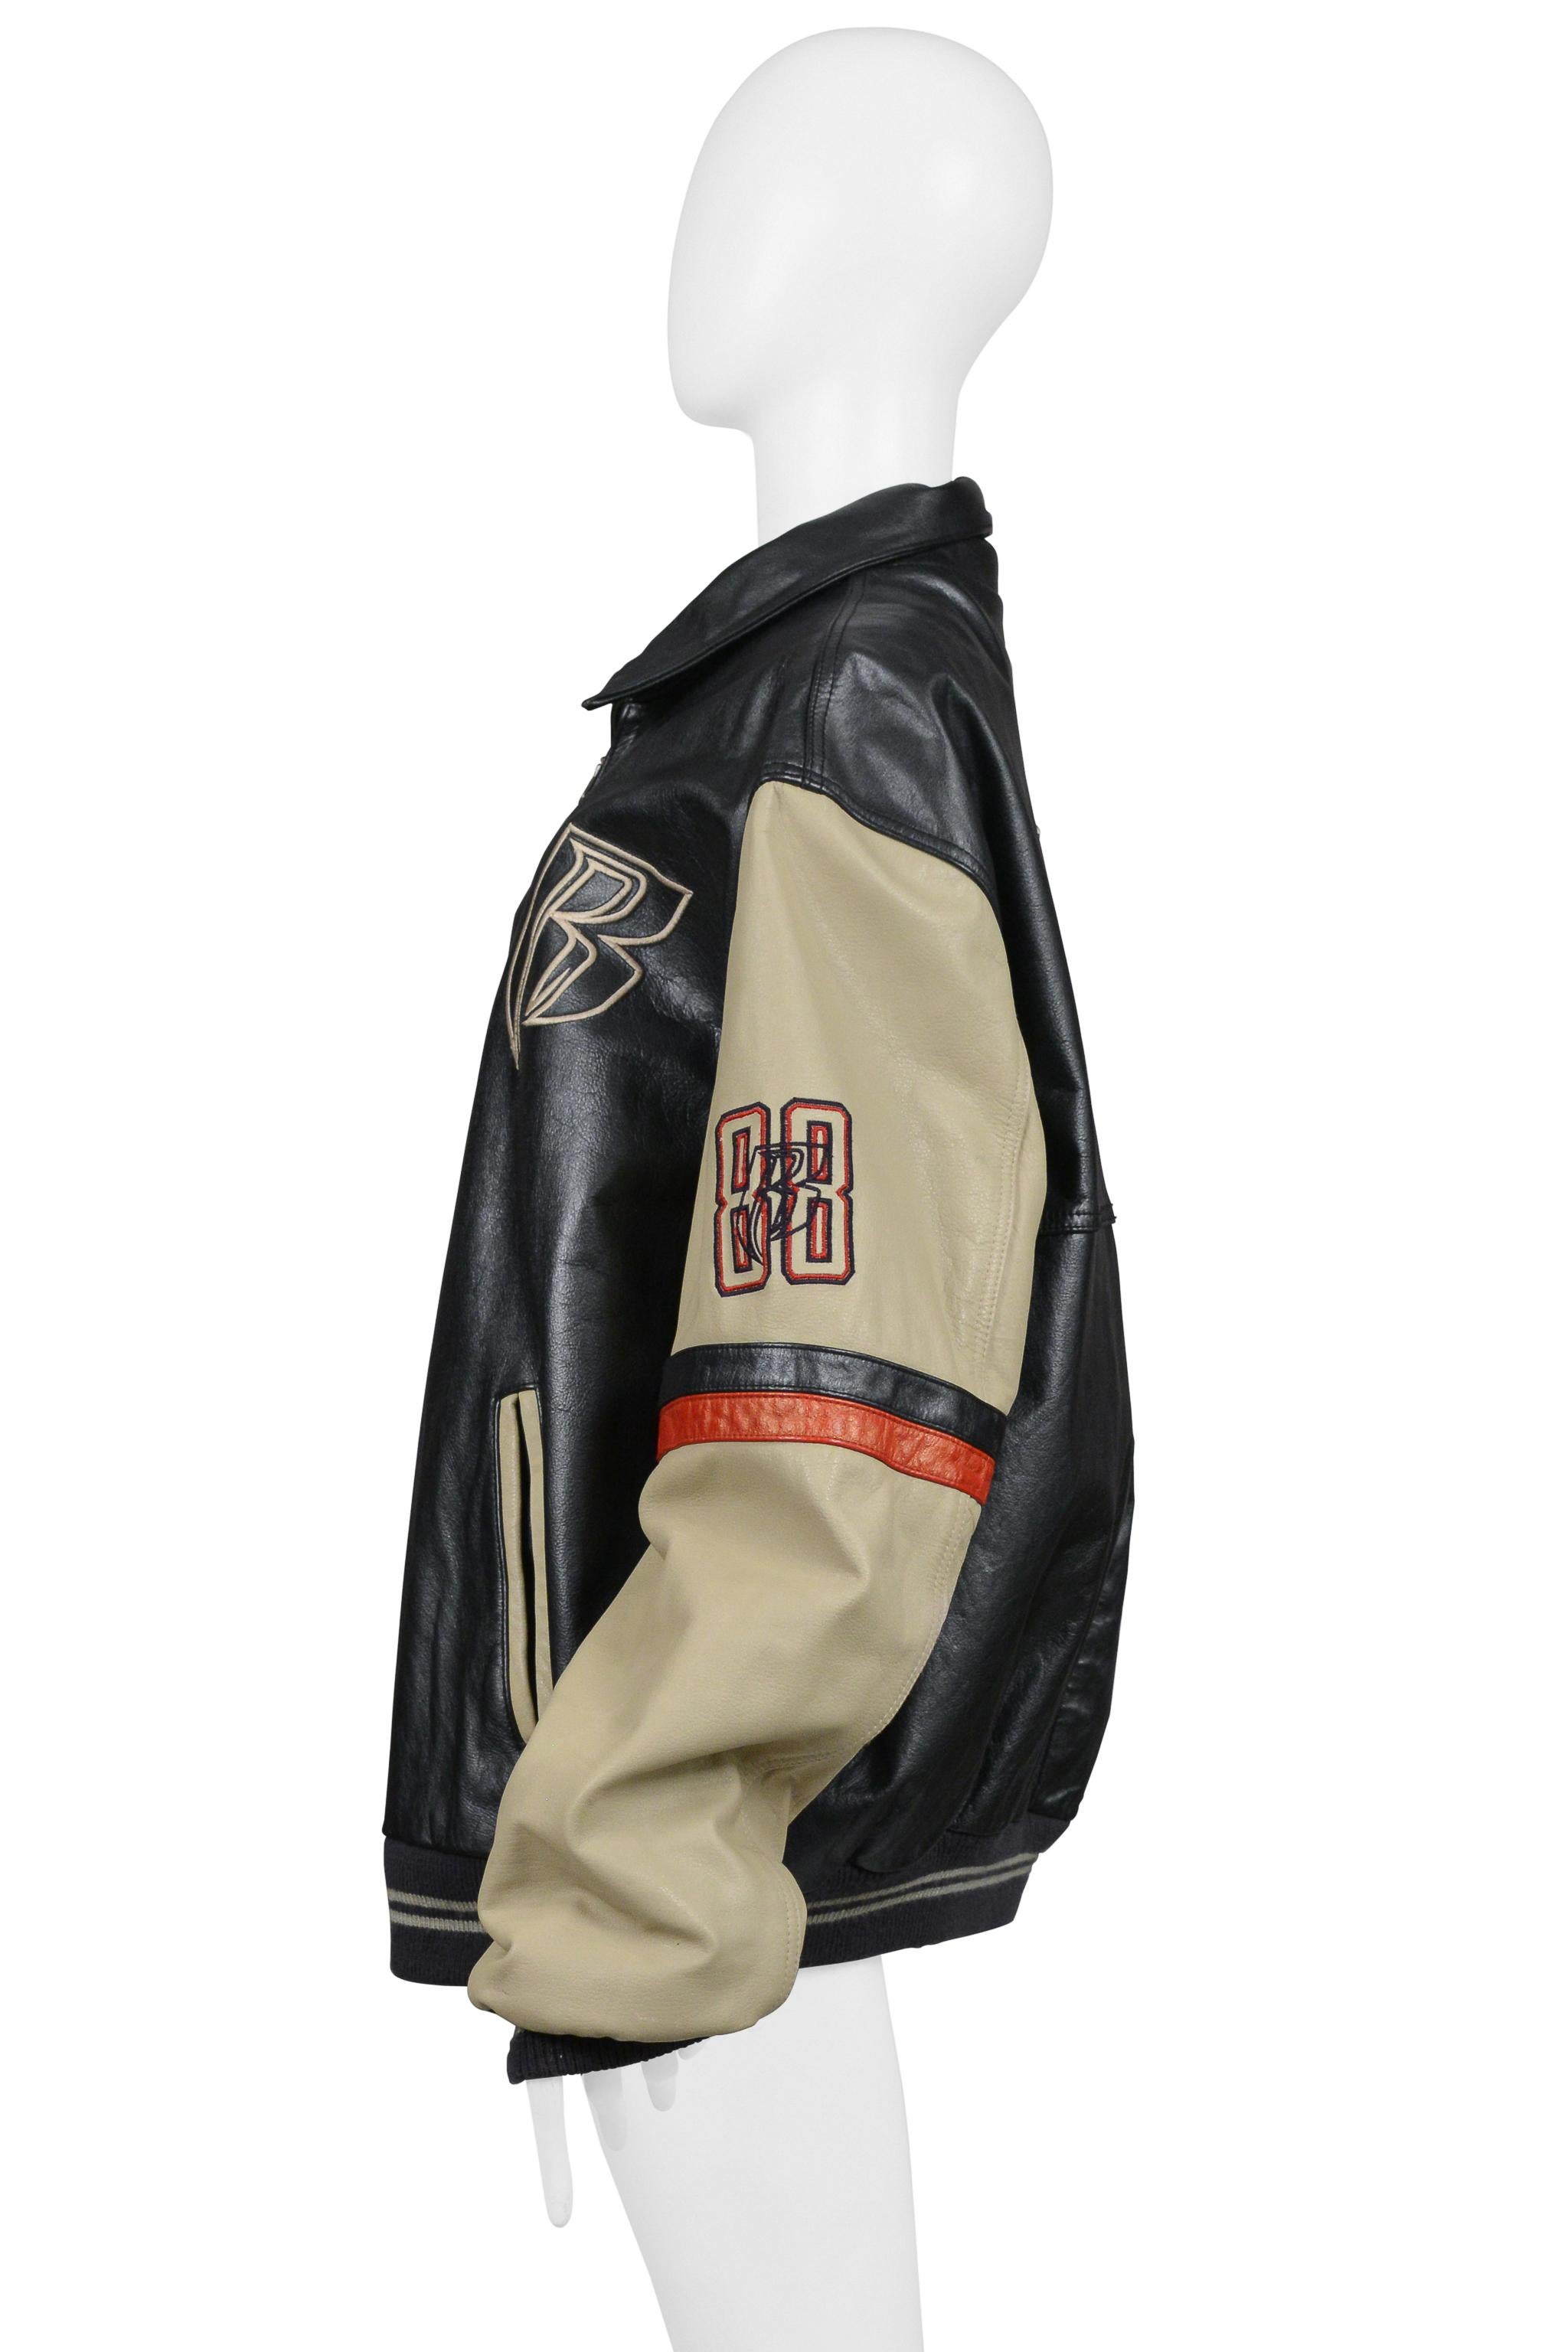 Ruff Ryders Unisex Leather Bomber Jacket For Sale 4